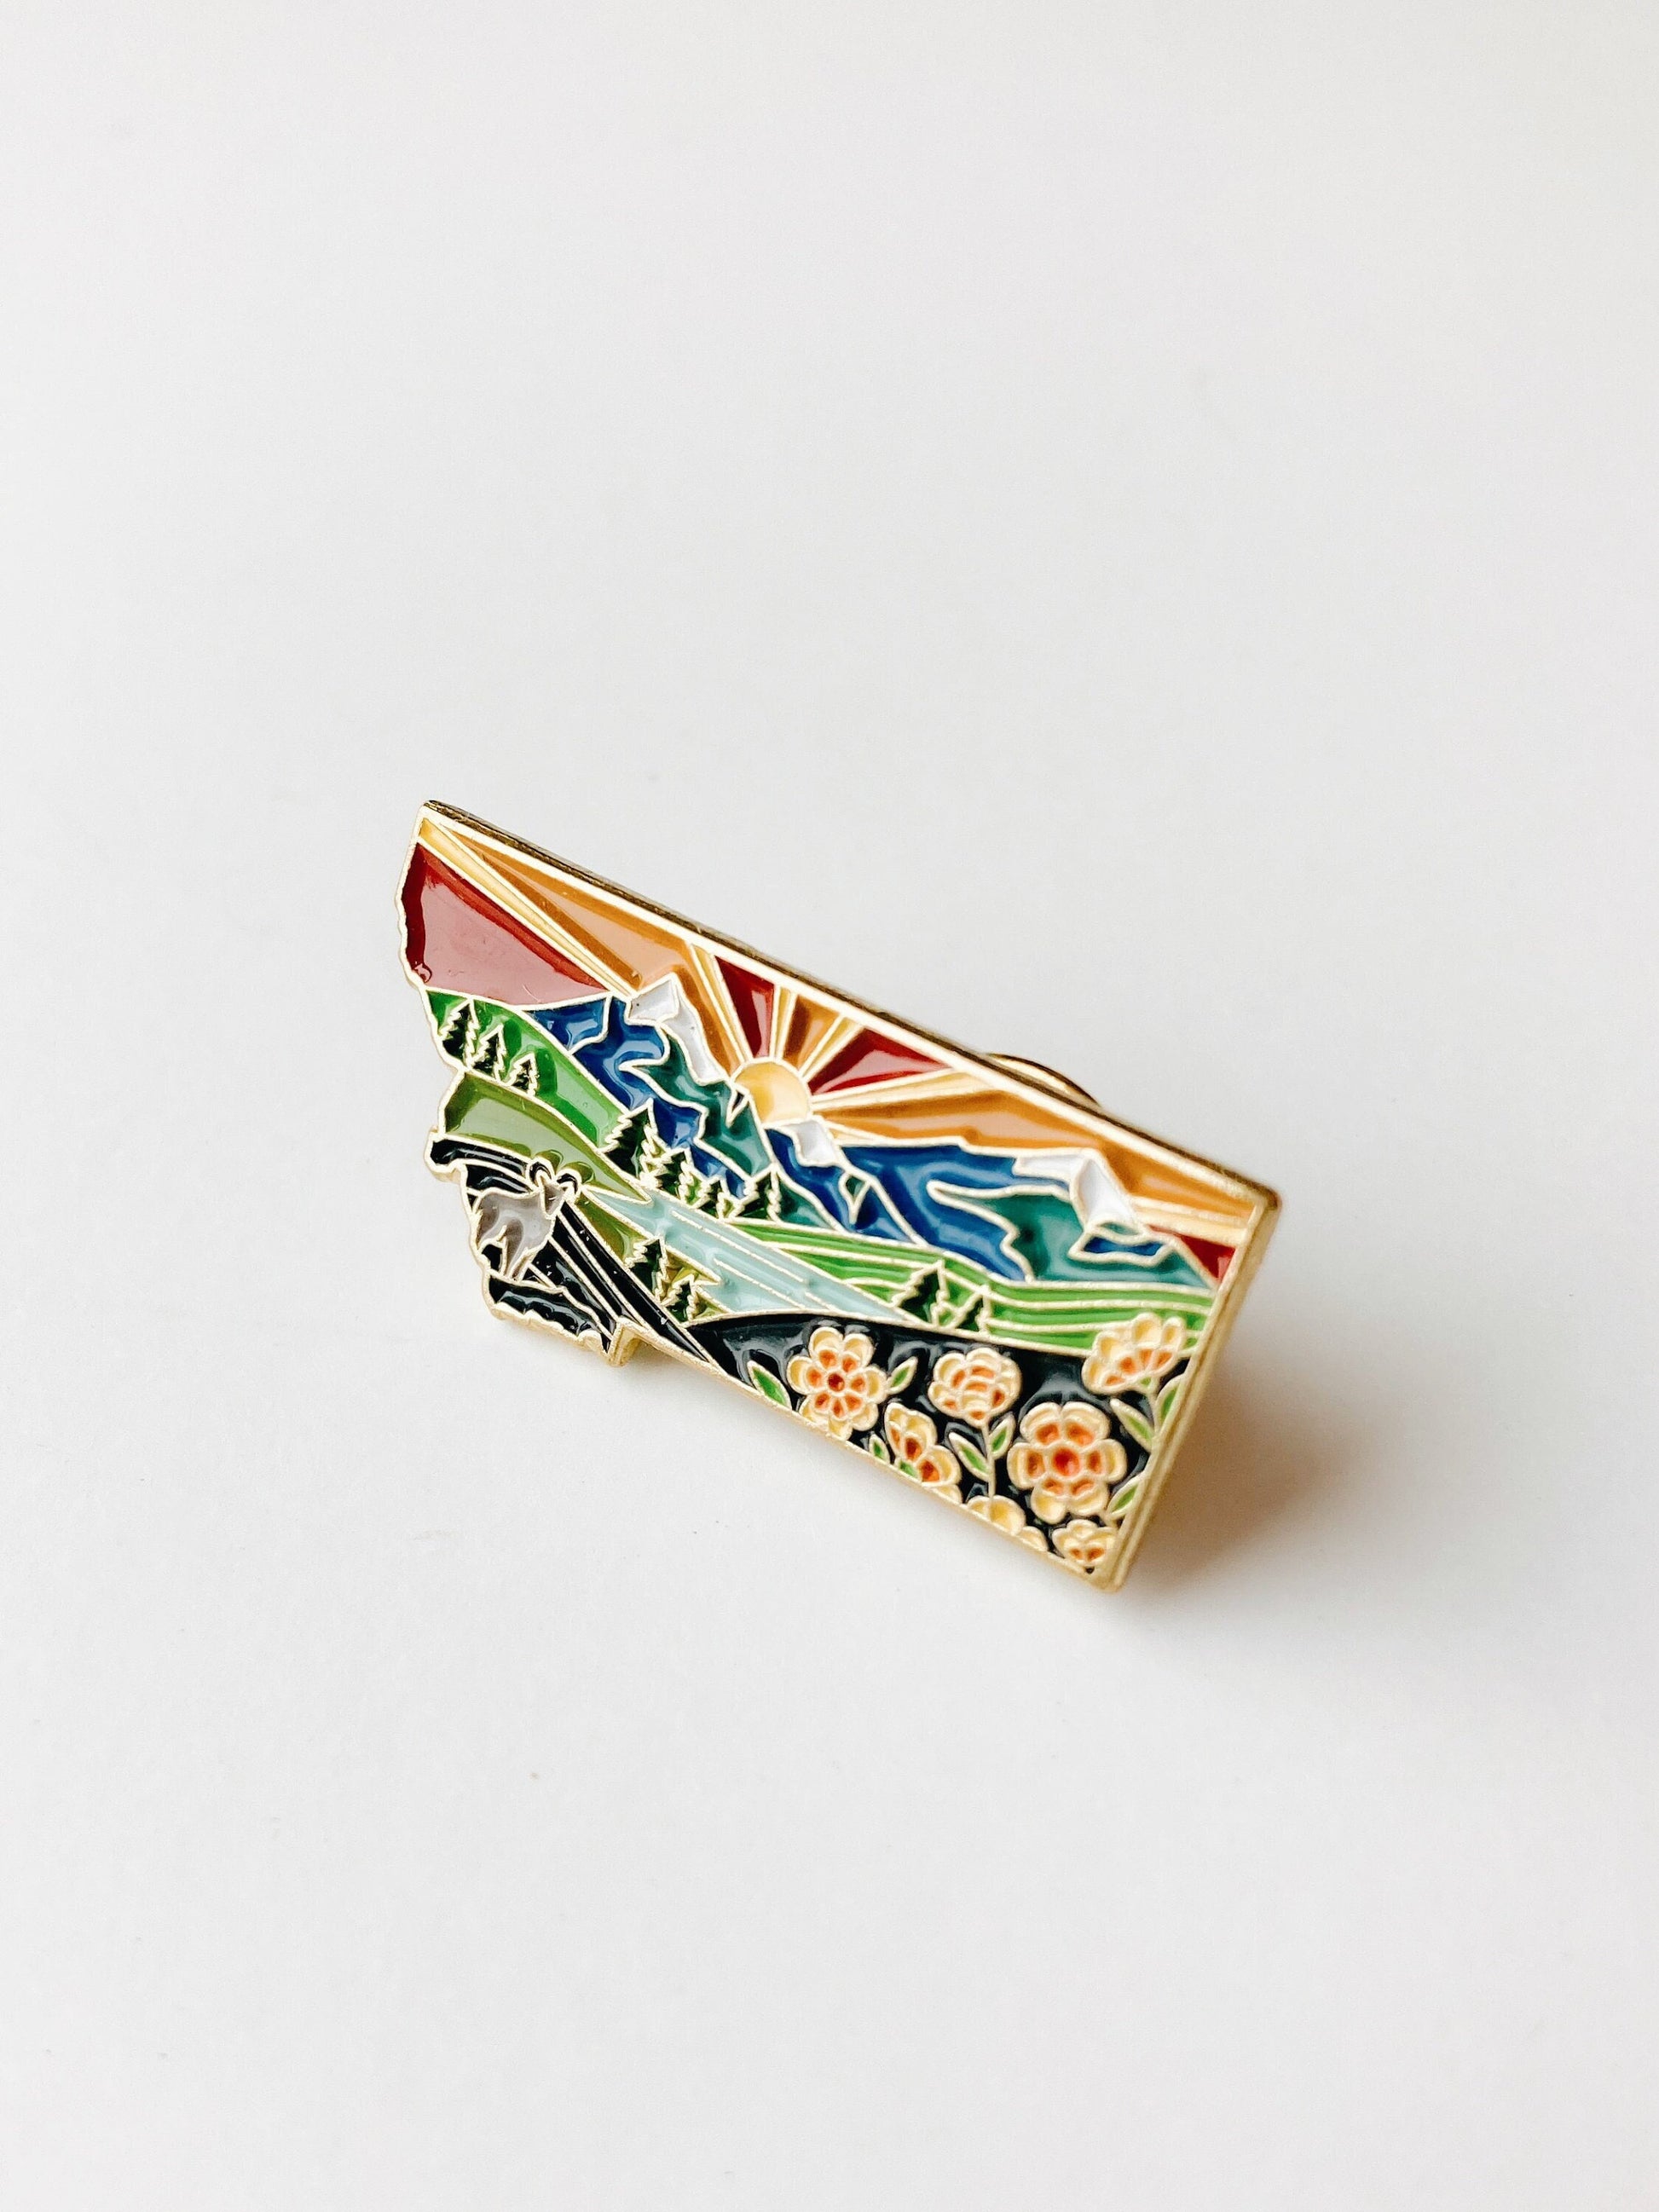 Montana Enamel Pin | Gold Soft Enamel Pin | Illustrated United States Pin | Butterfly Clasp | 1.25"